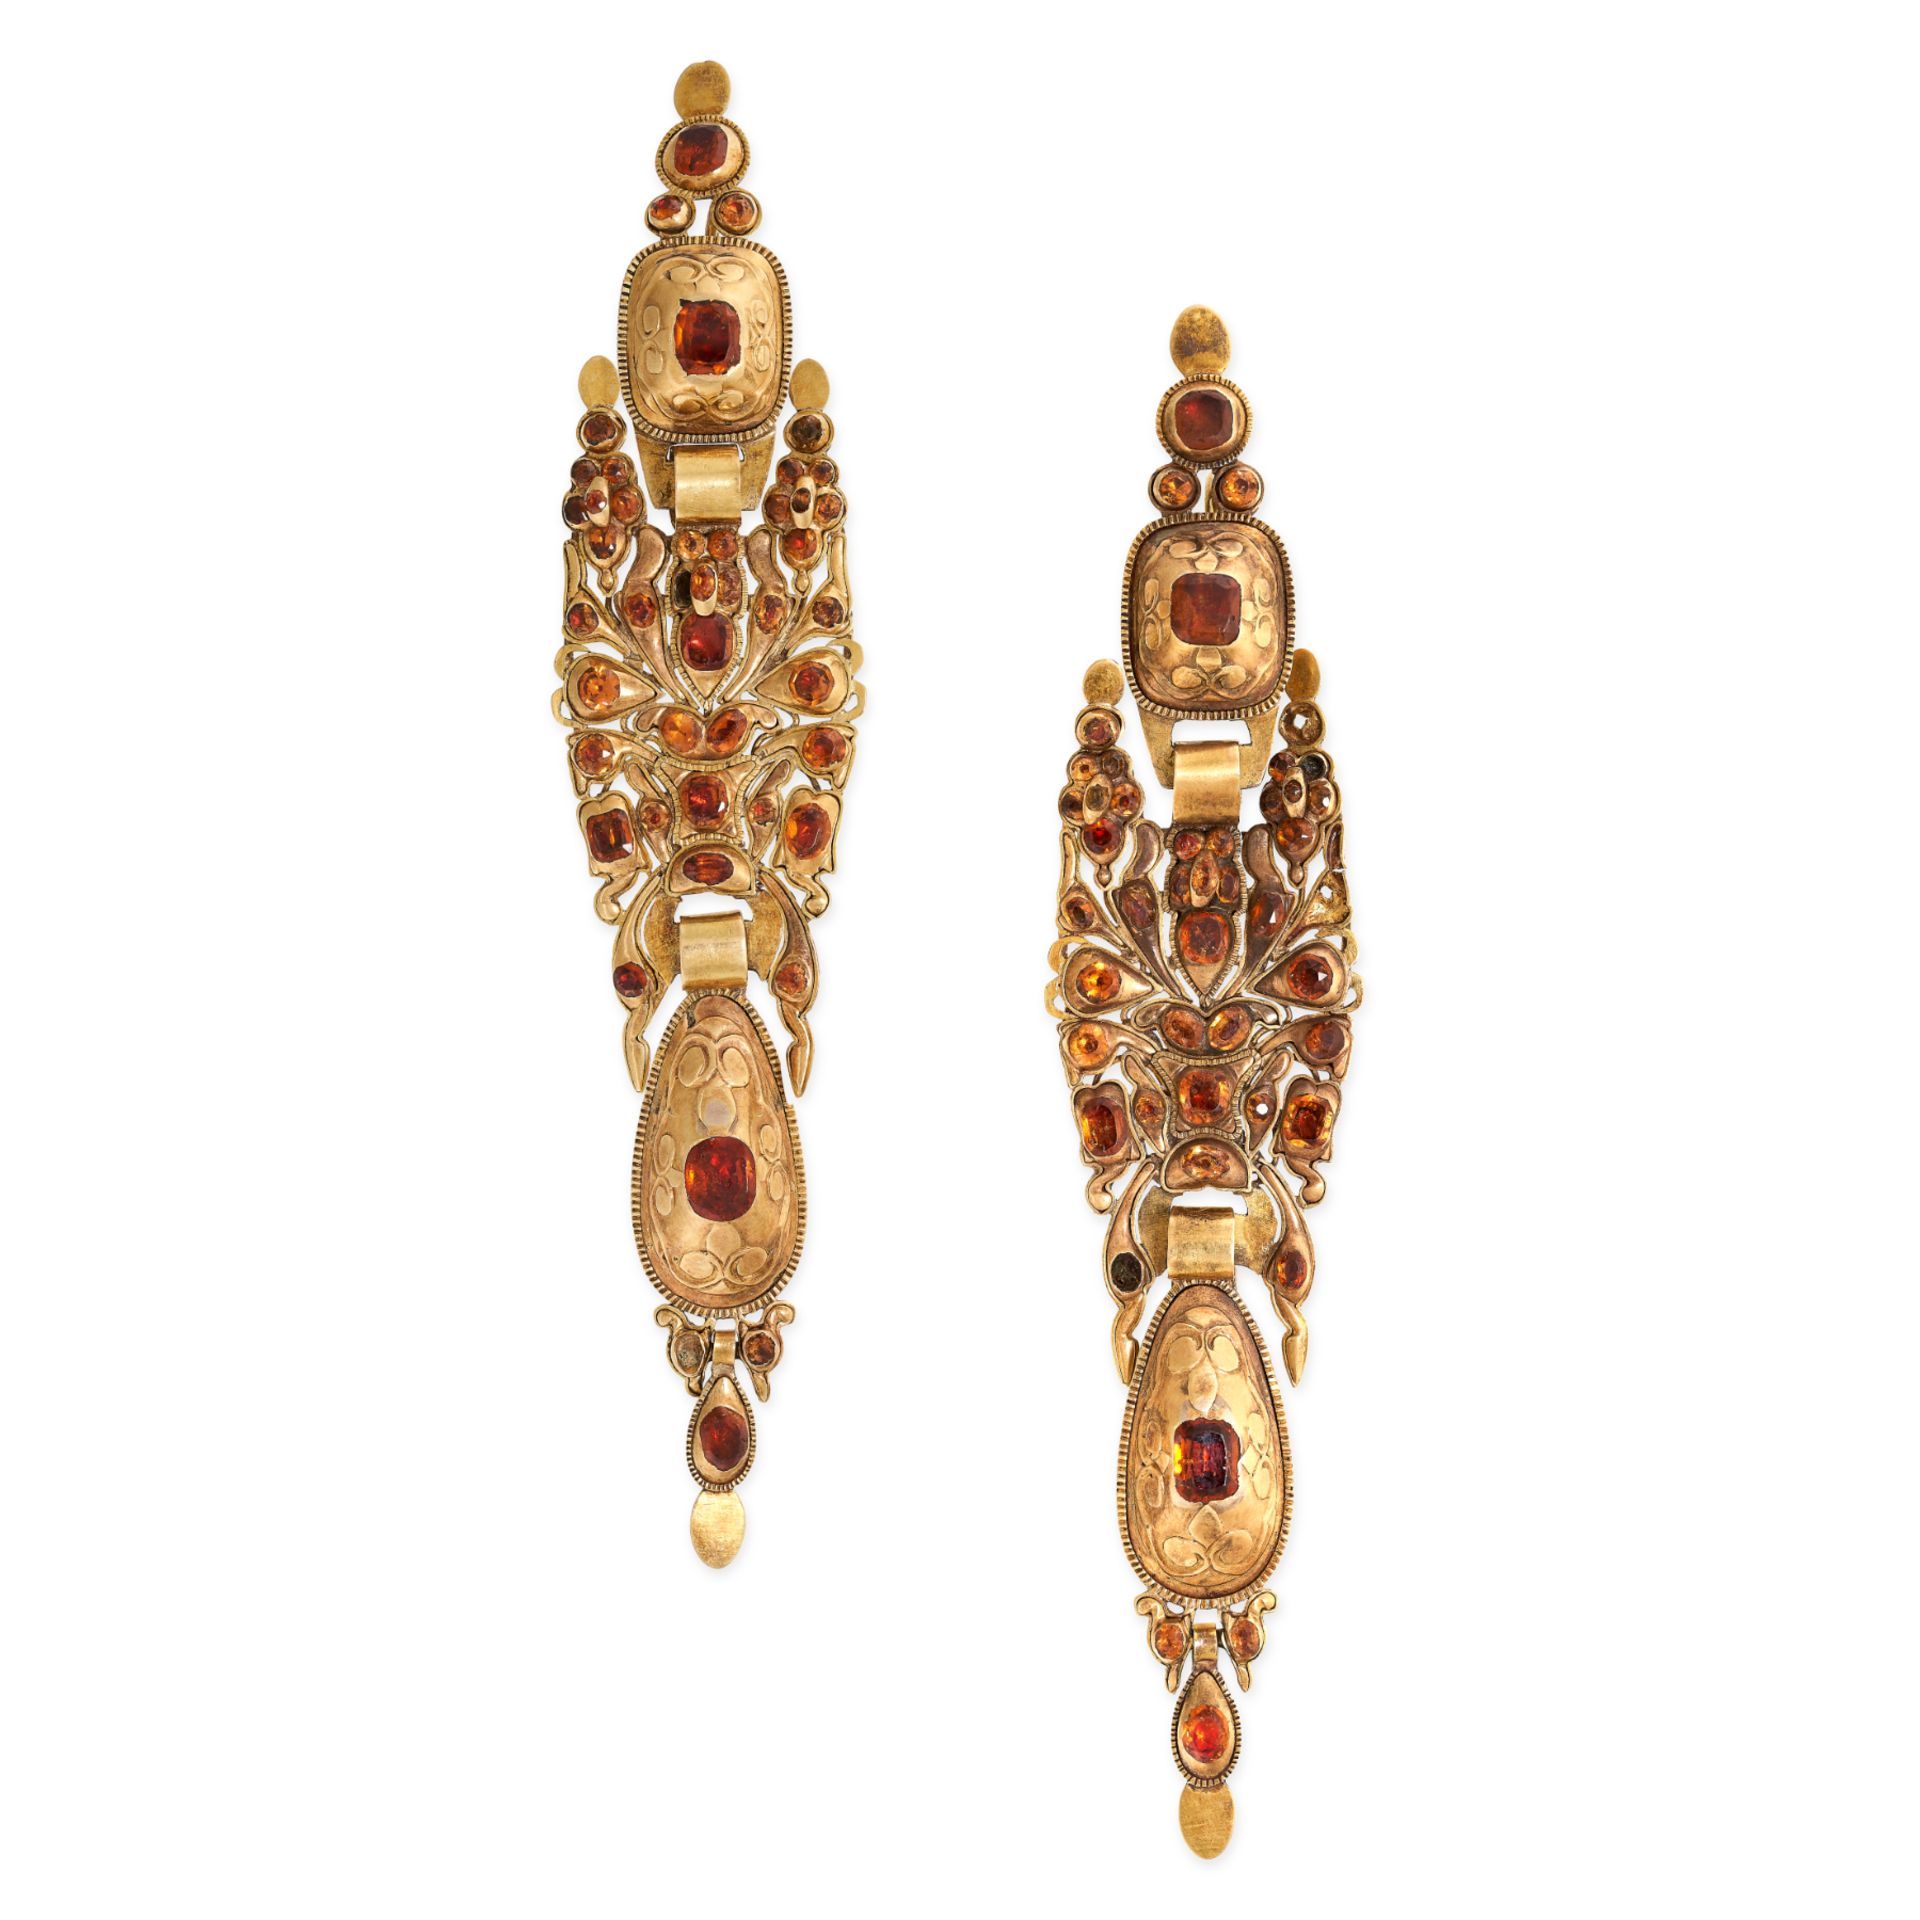 A PAIR OF ANTIQUE CATALAN HESSONITE GARNET DROP EARRINGS, SPANISH CIRCA 1800 in yellow gold, set